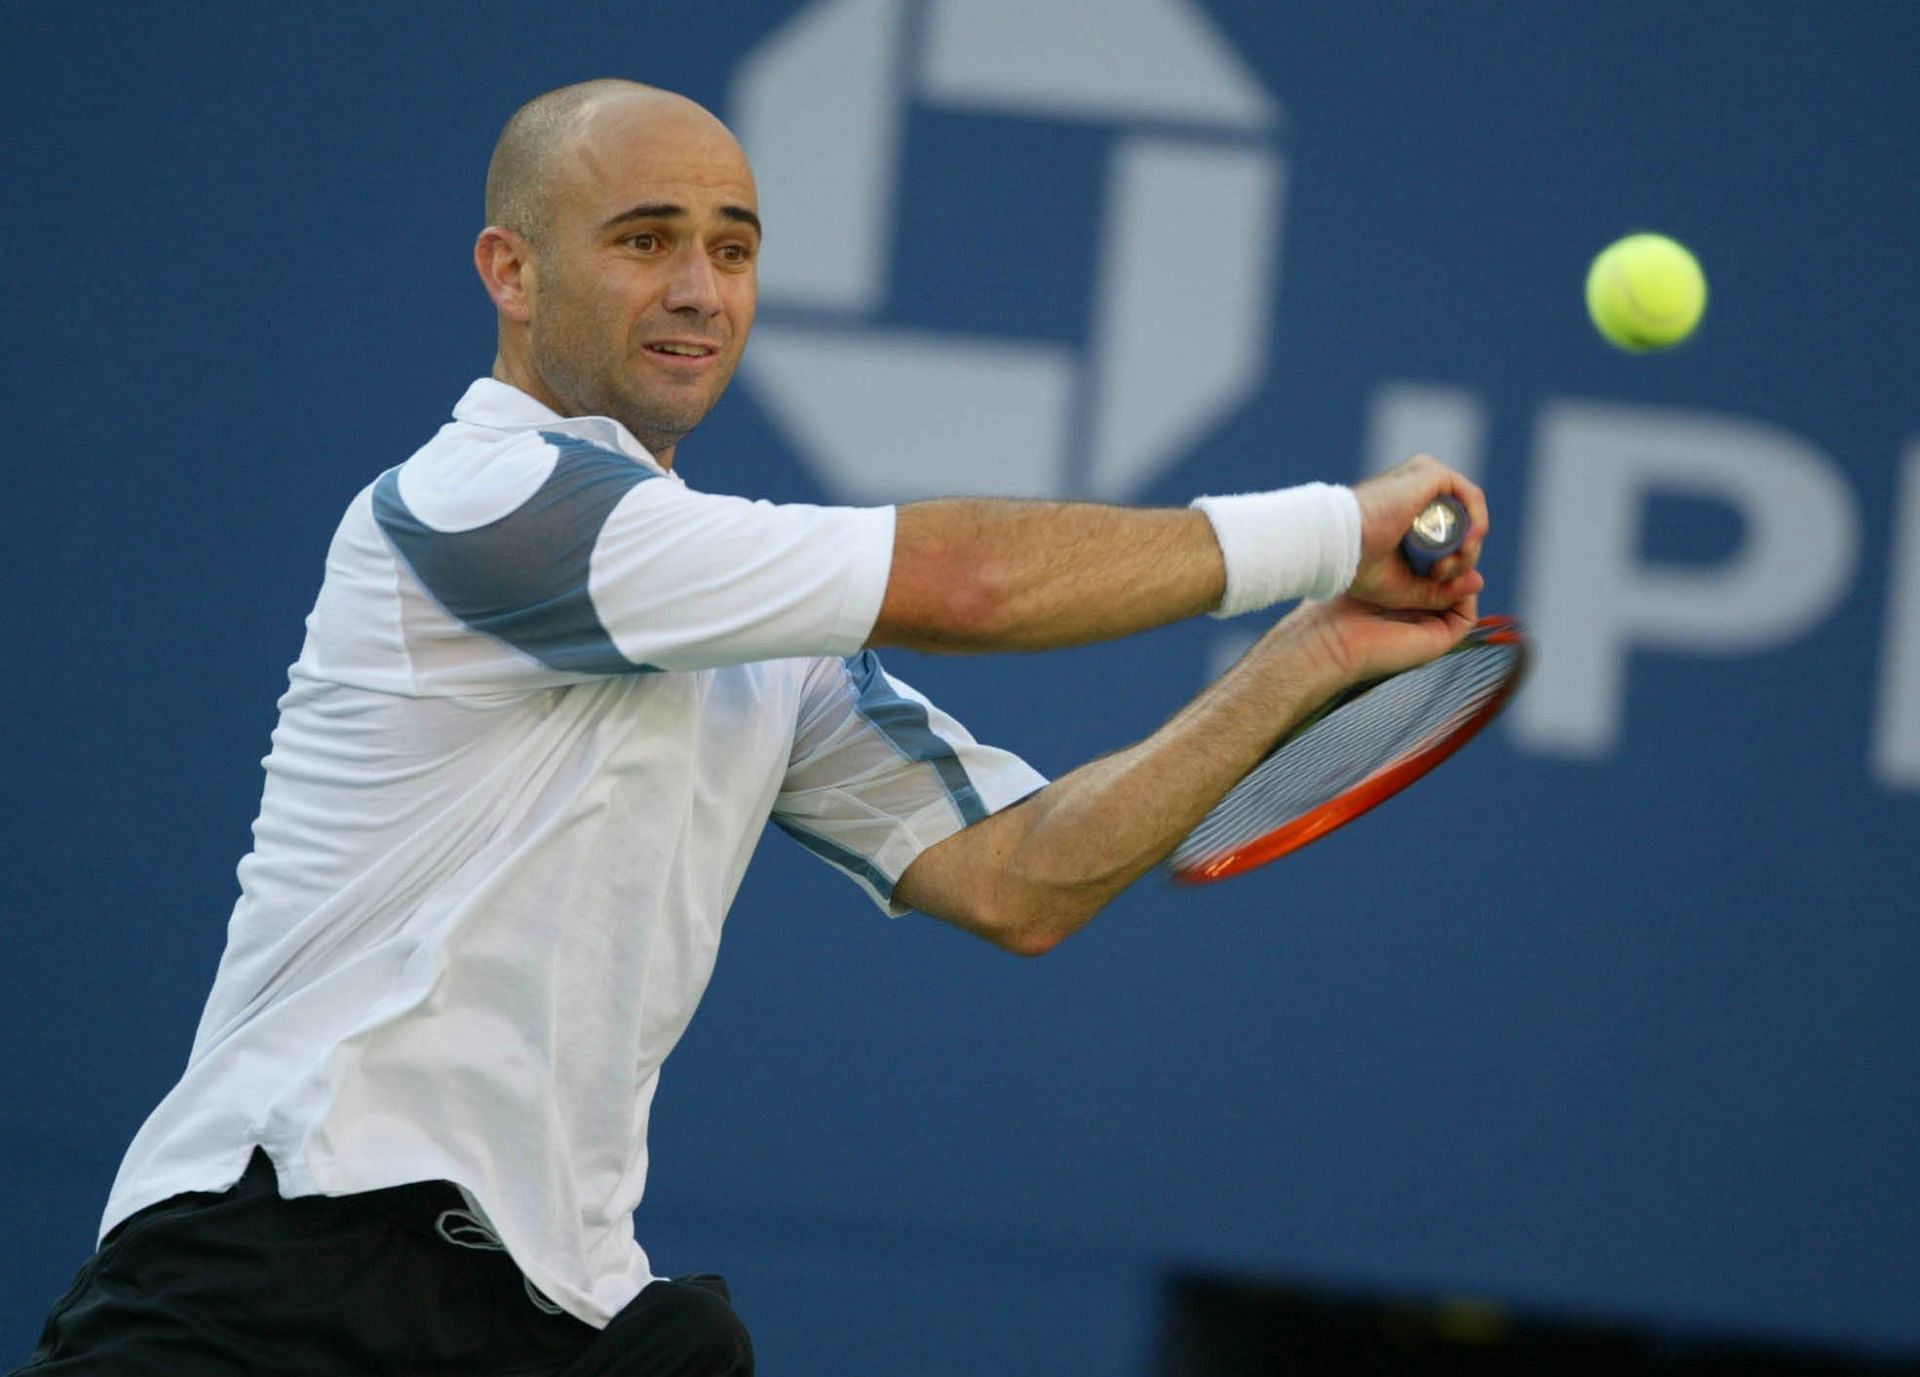 Andre Agassi at the 2002 US Open